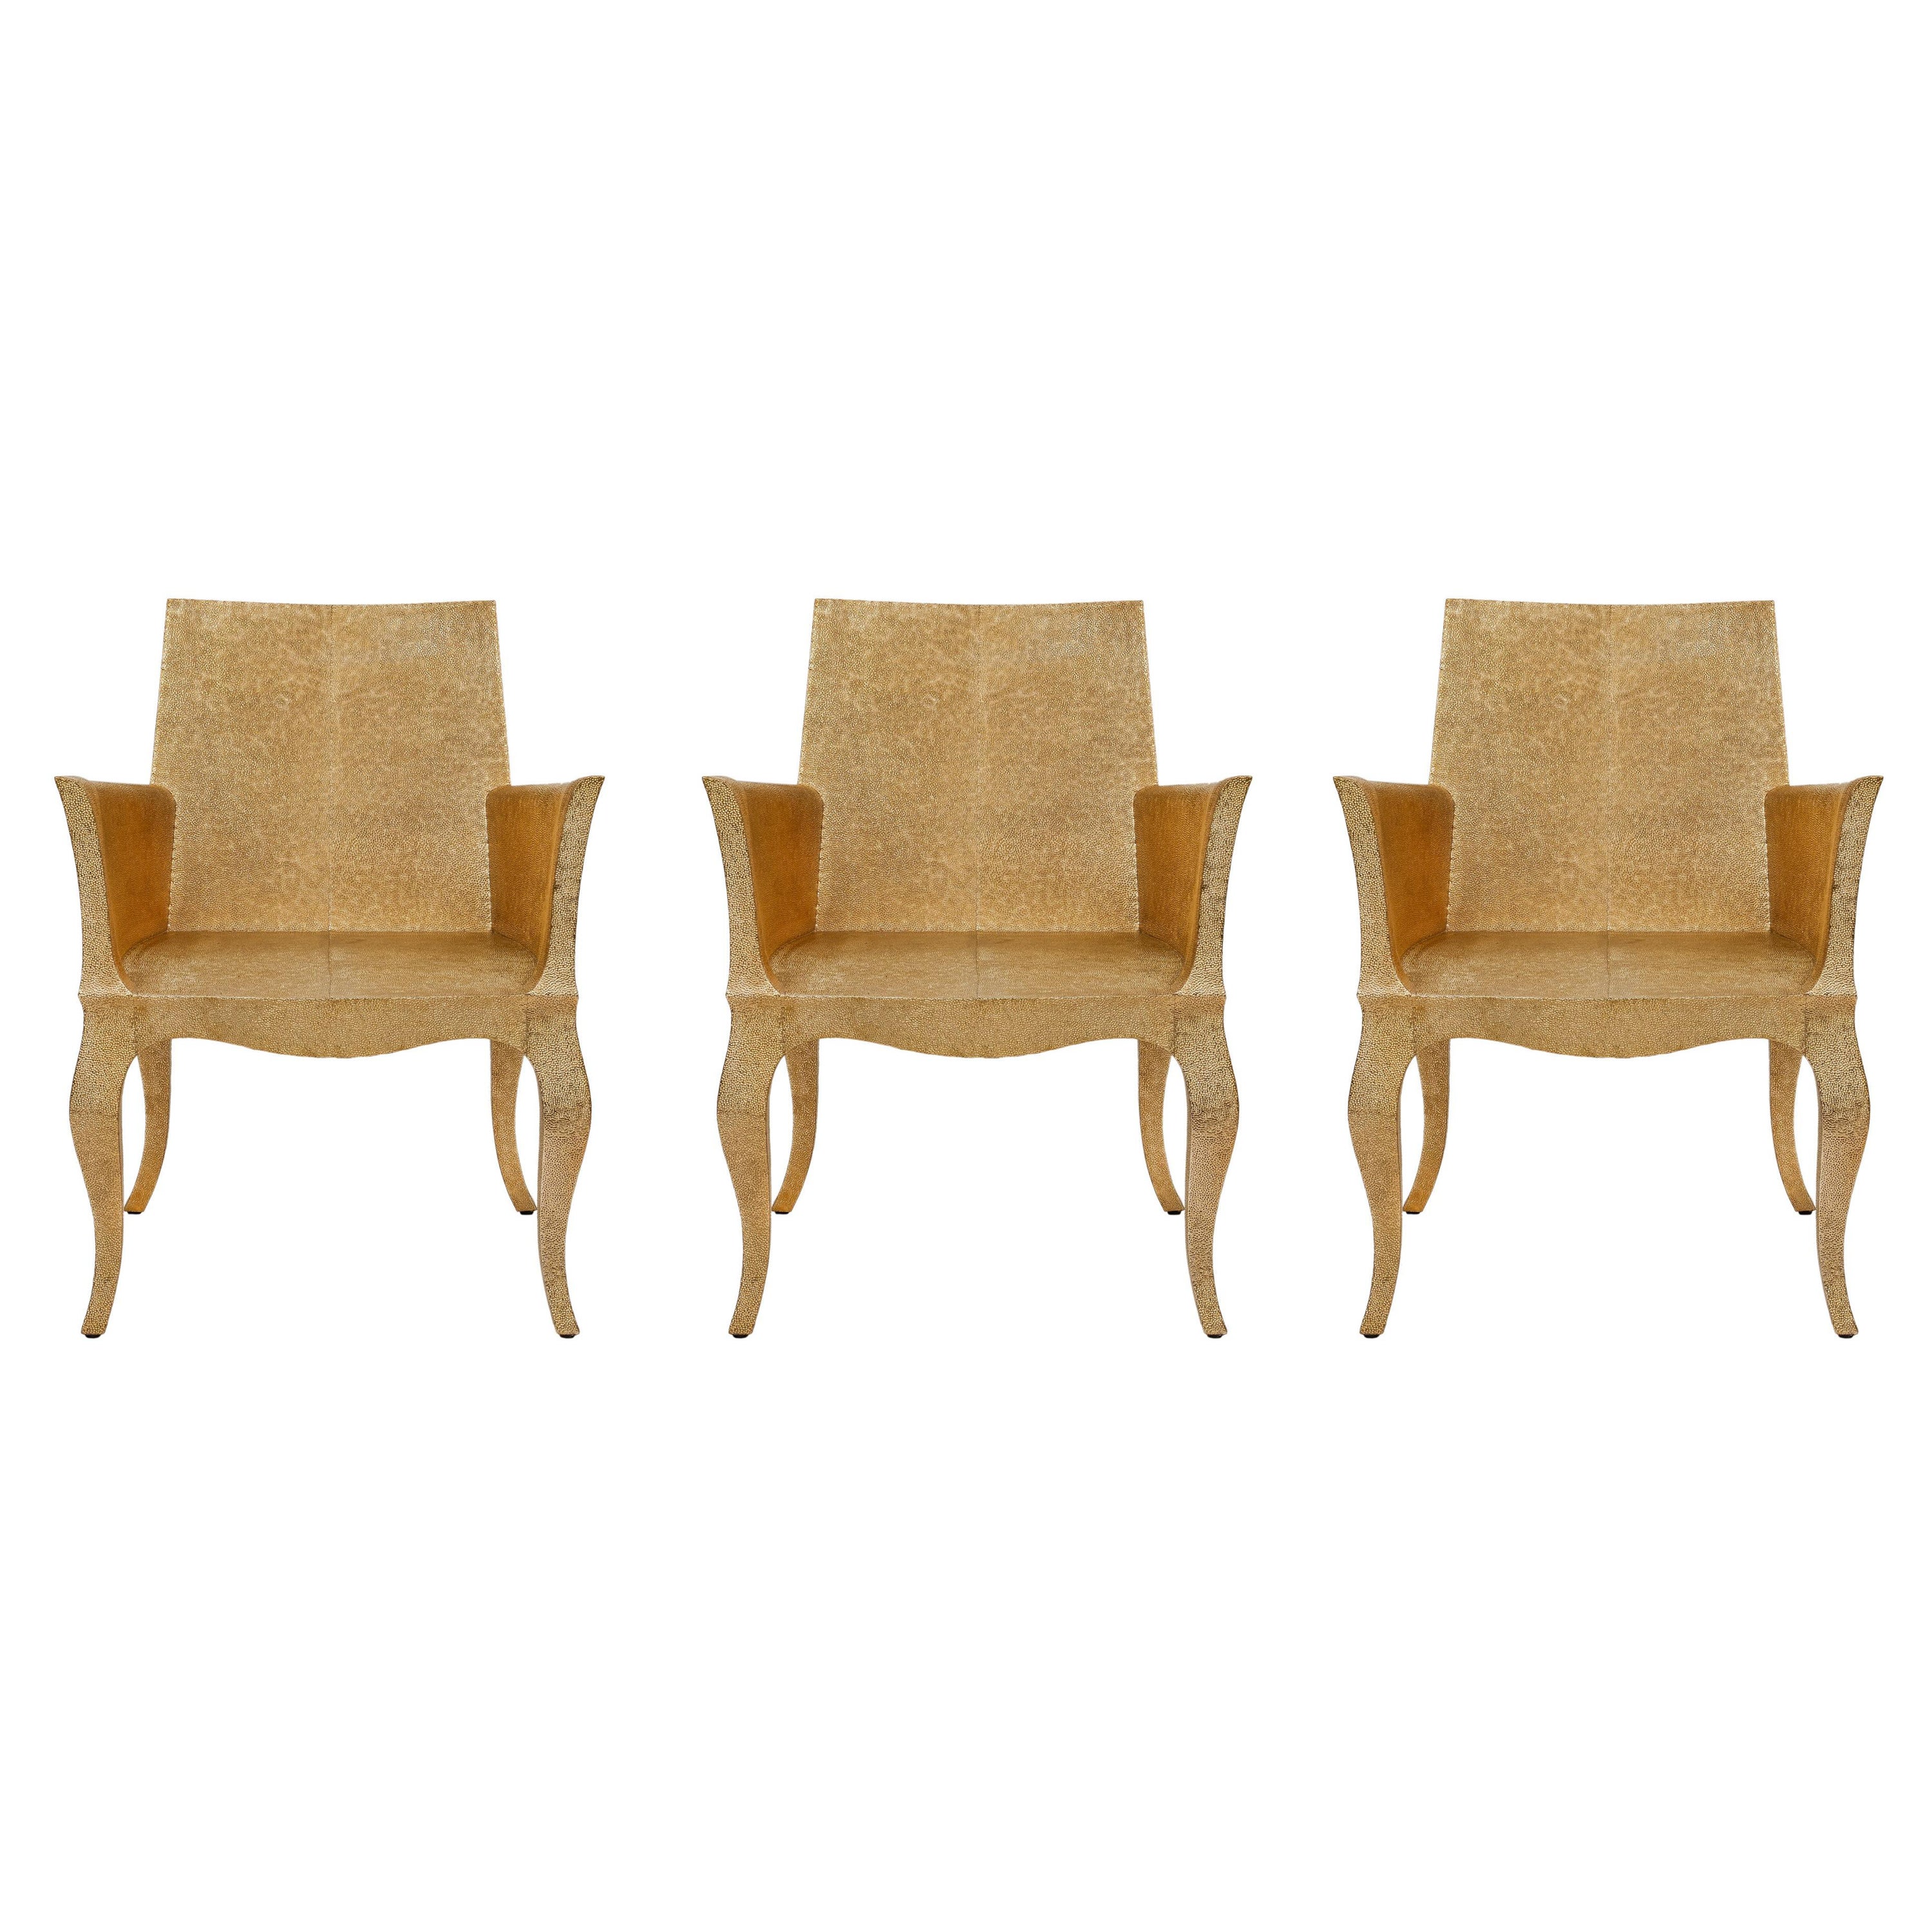 Set of Three Louise Club Chairs in Medium Hammered Brass Over Wood by P. Mathieu